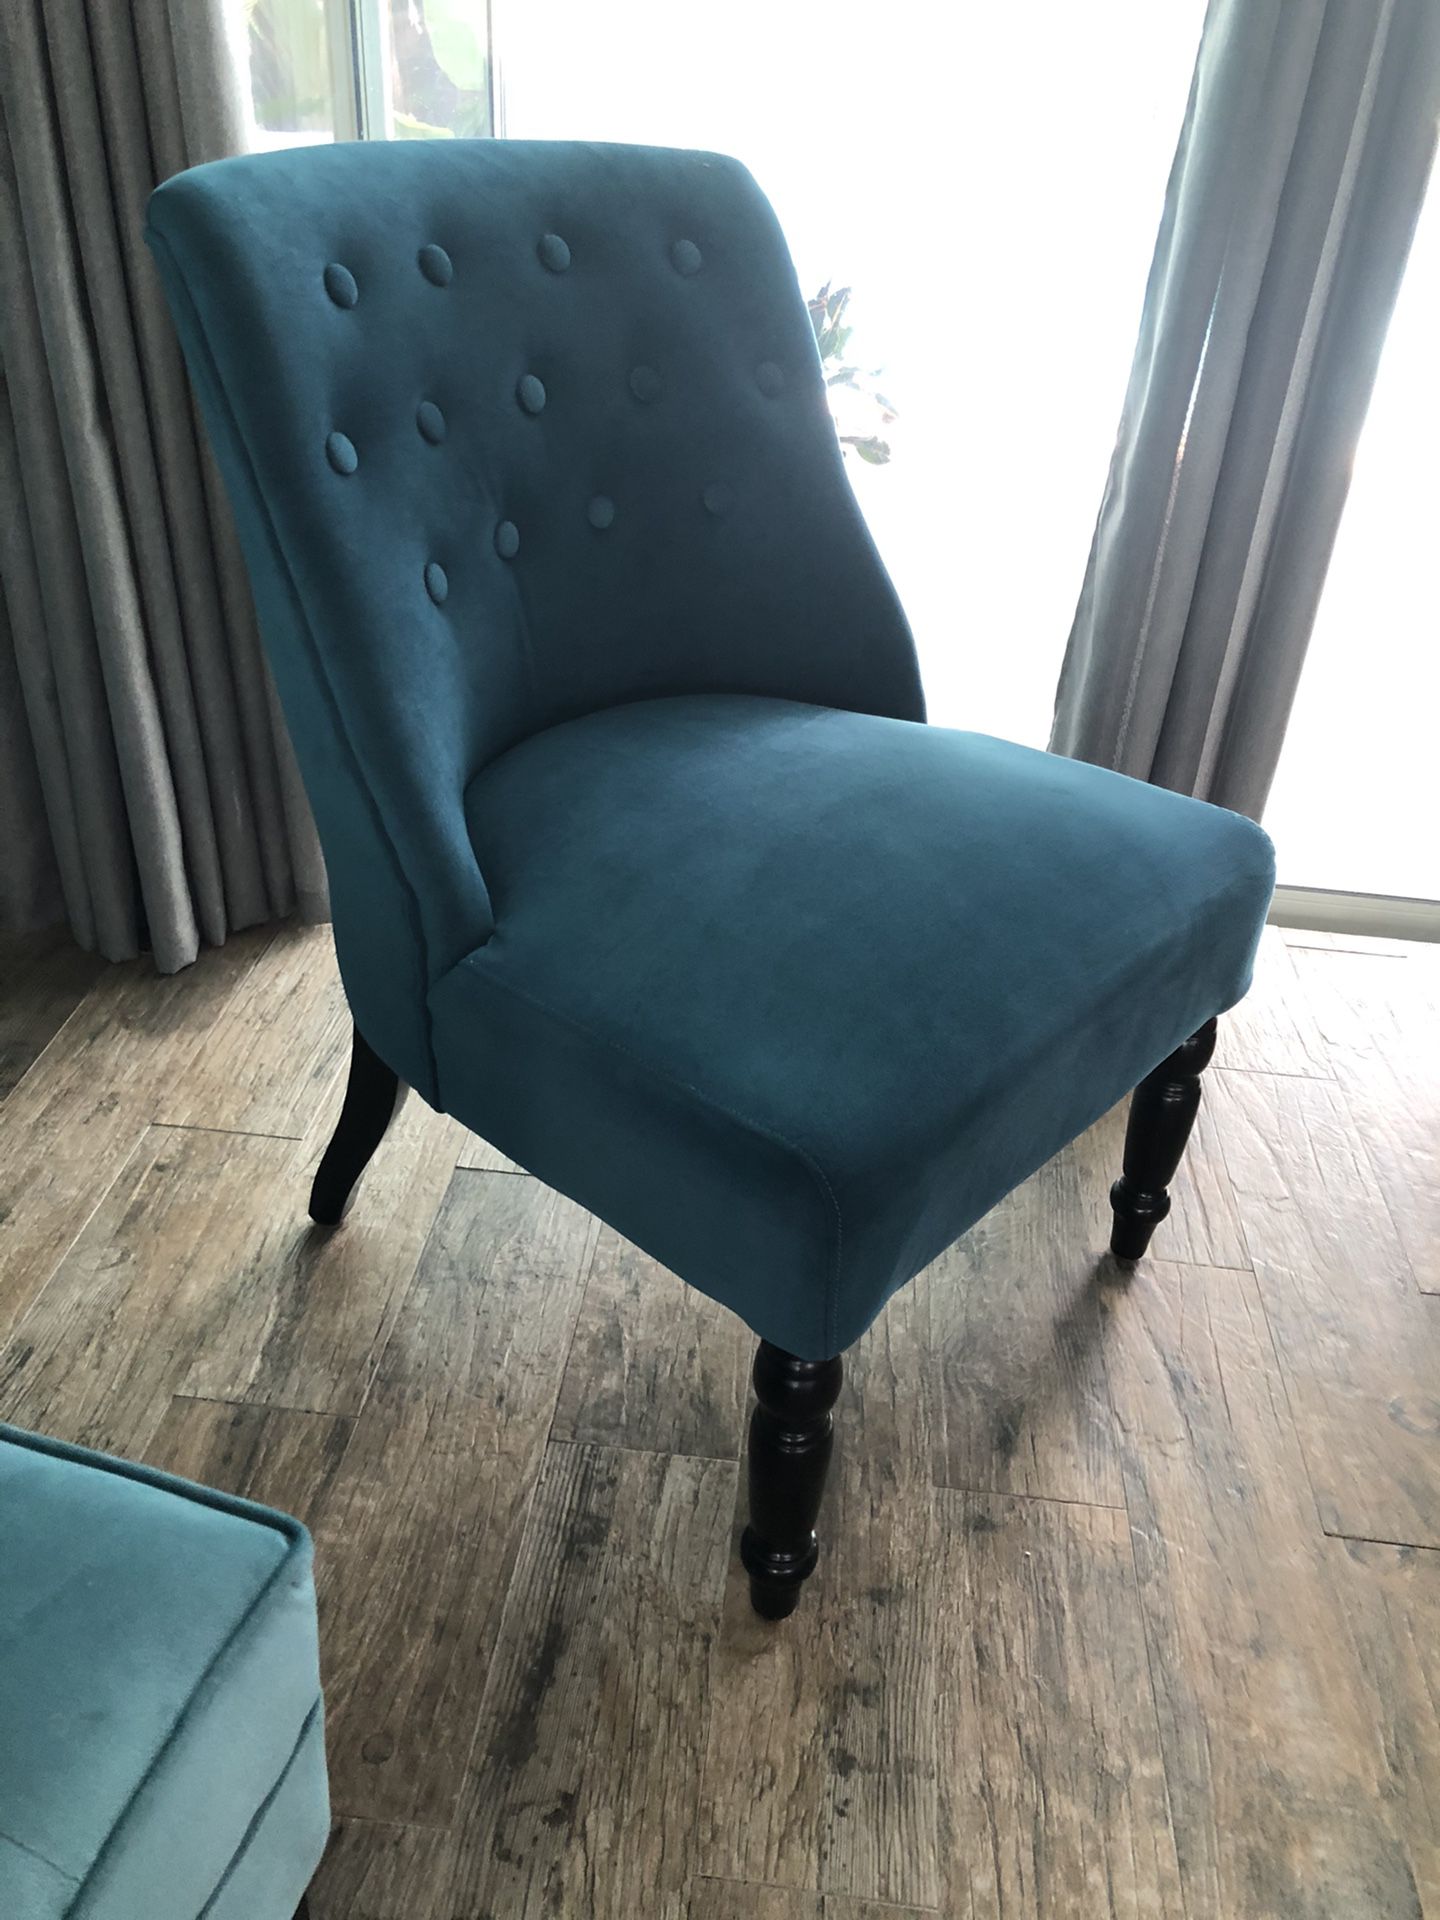 Chair beautiful turquoise $40 or best offer